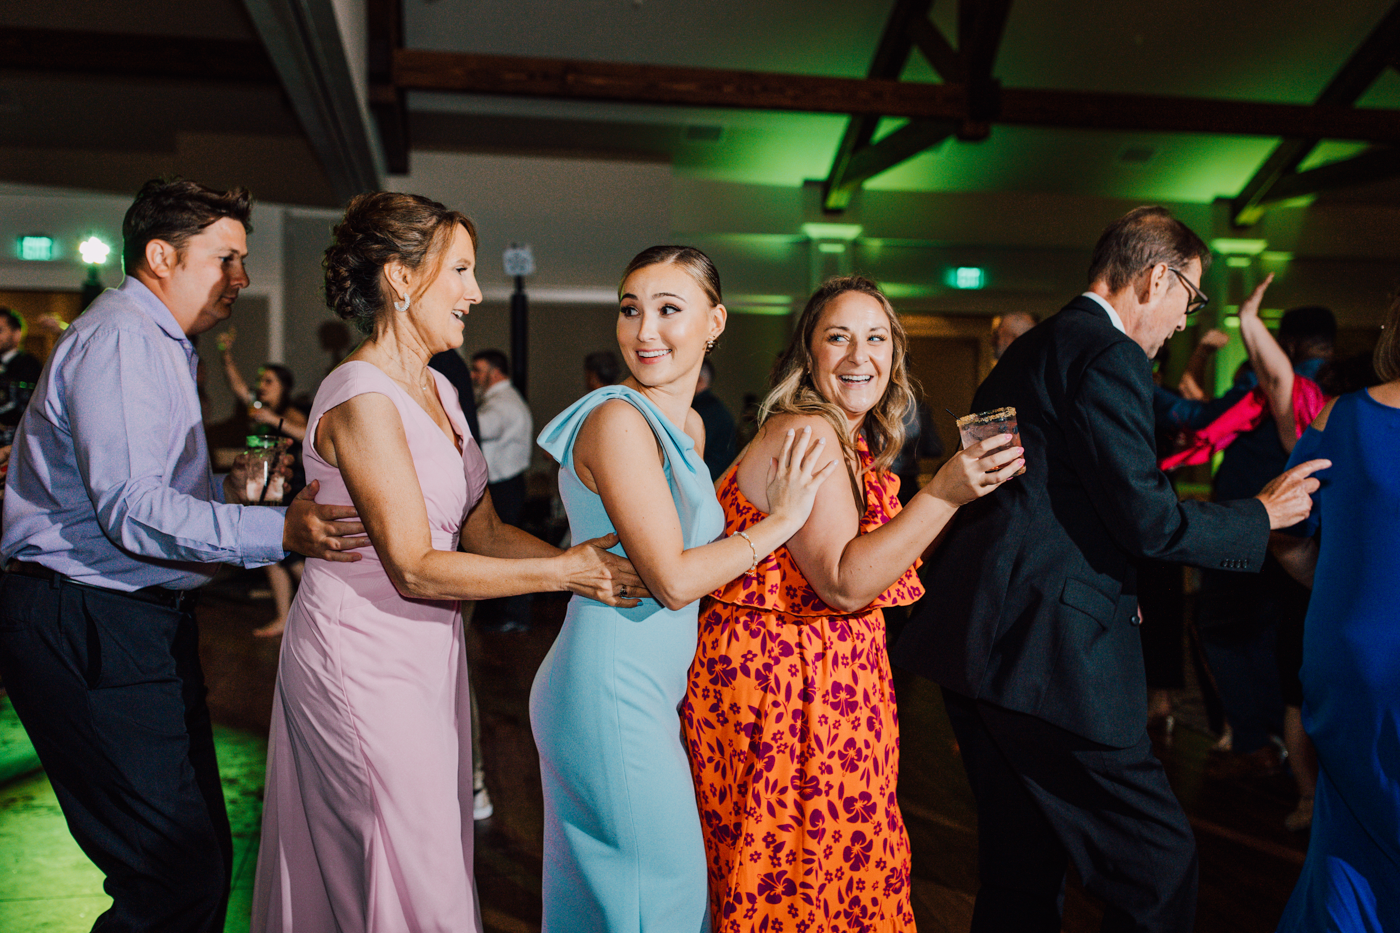  Wedding guests dance in a conga line during a reception at Timber Banks in Baldwinsville NY 